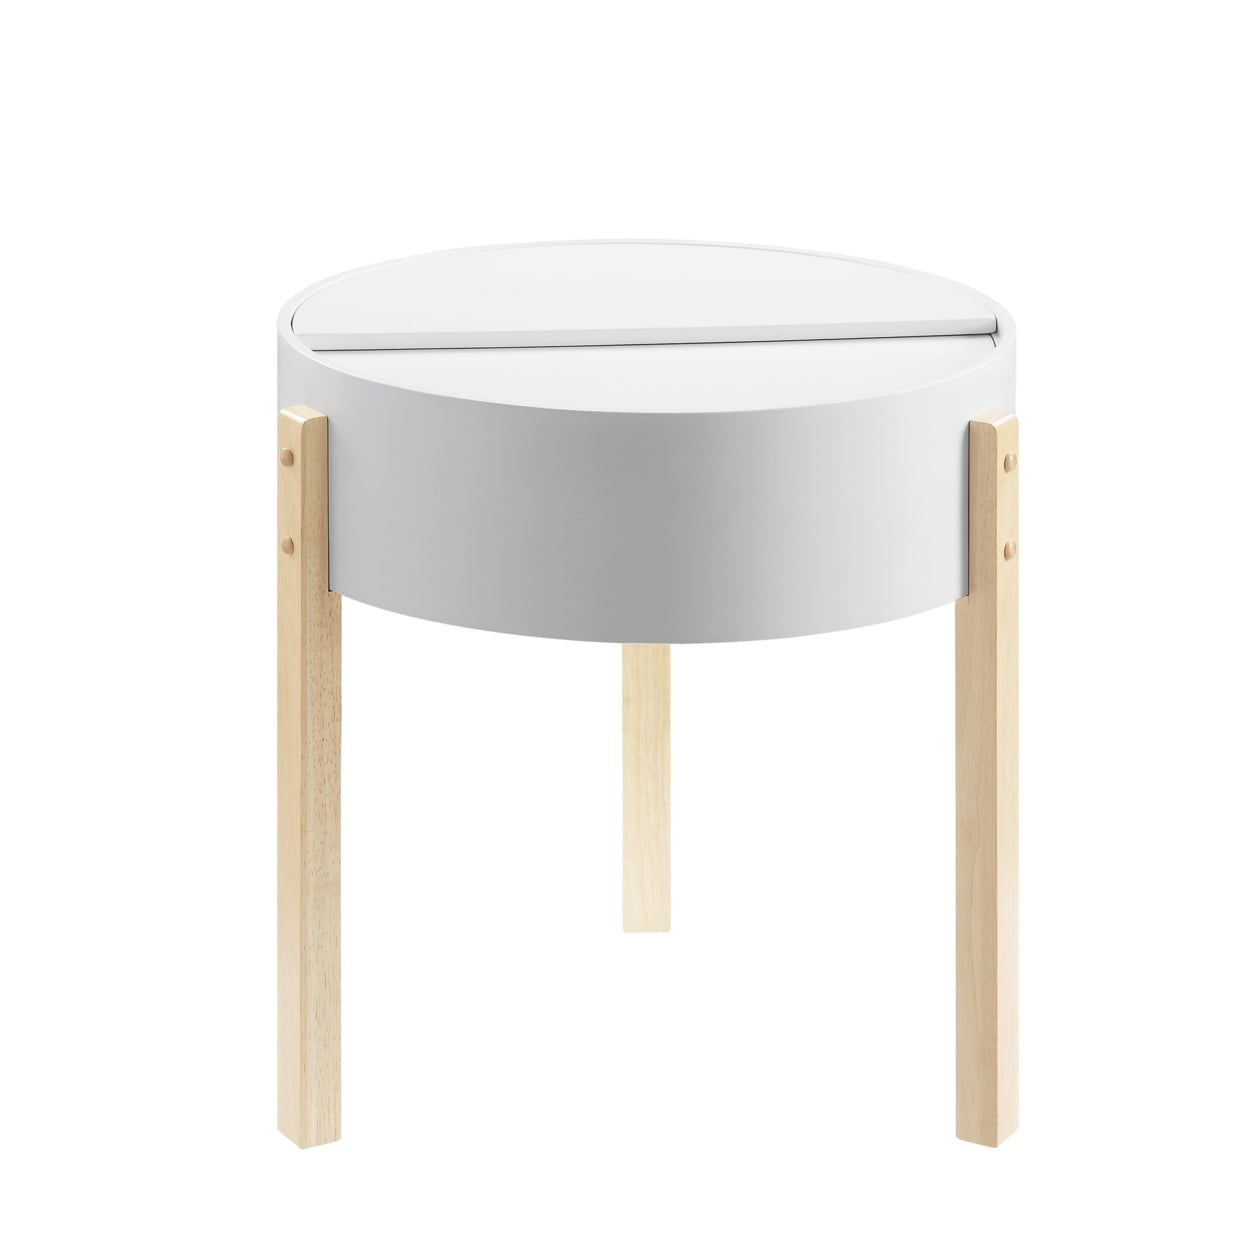 Picture of Benjara BM211090 Round Wooden End Table with Hidden Storage - White & Brown - 21 x 20 x 20 in.